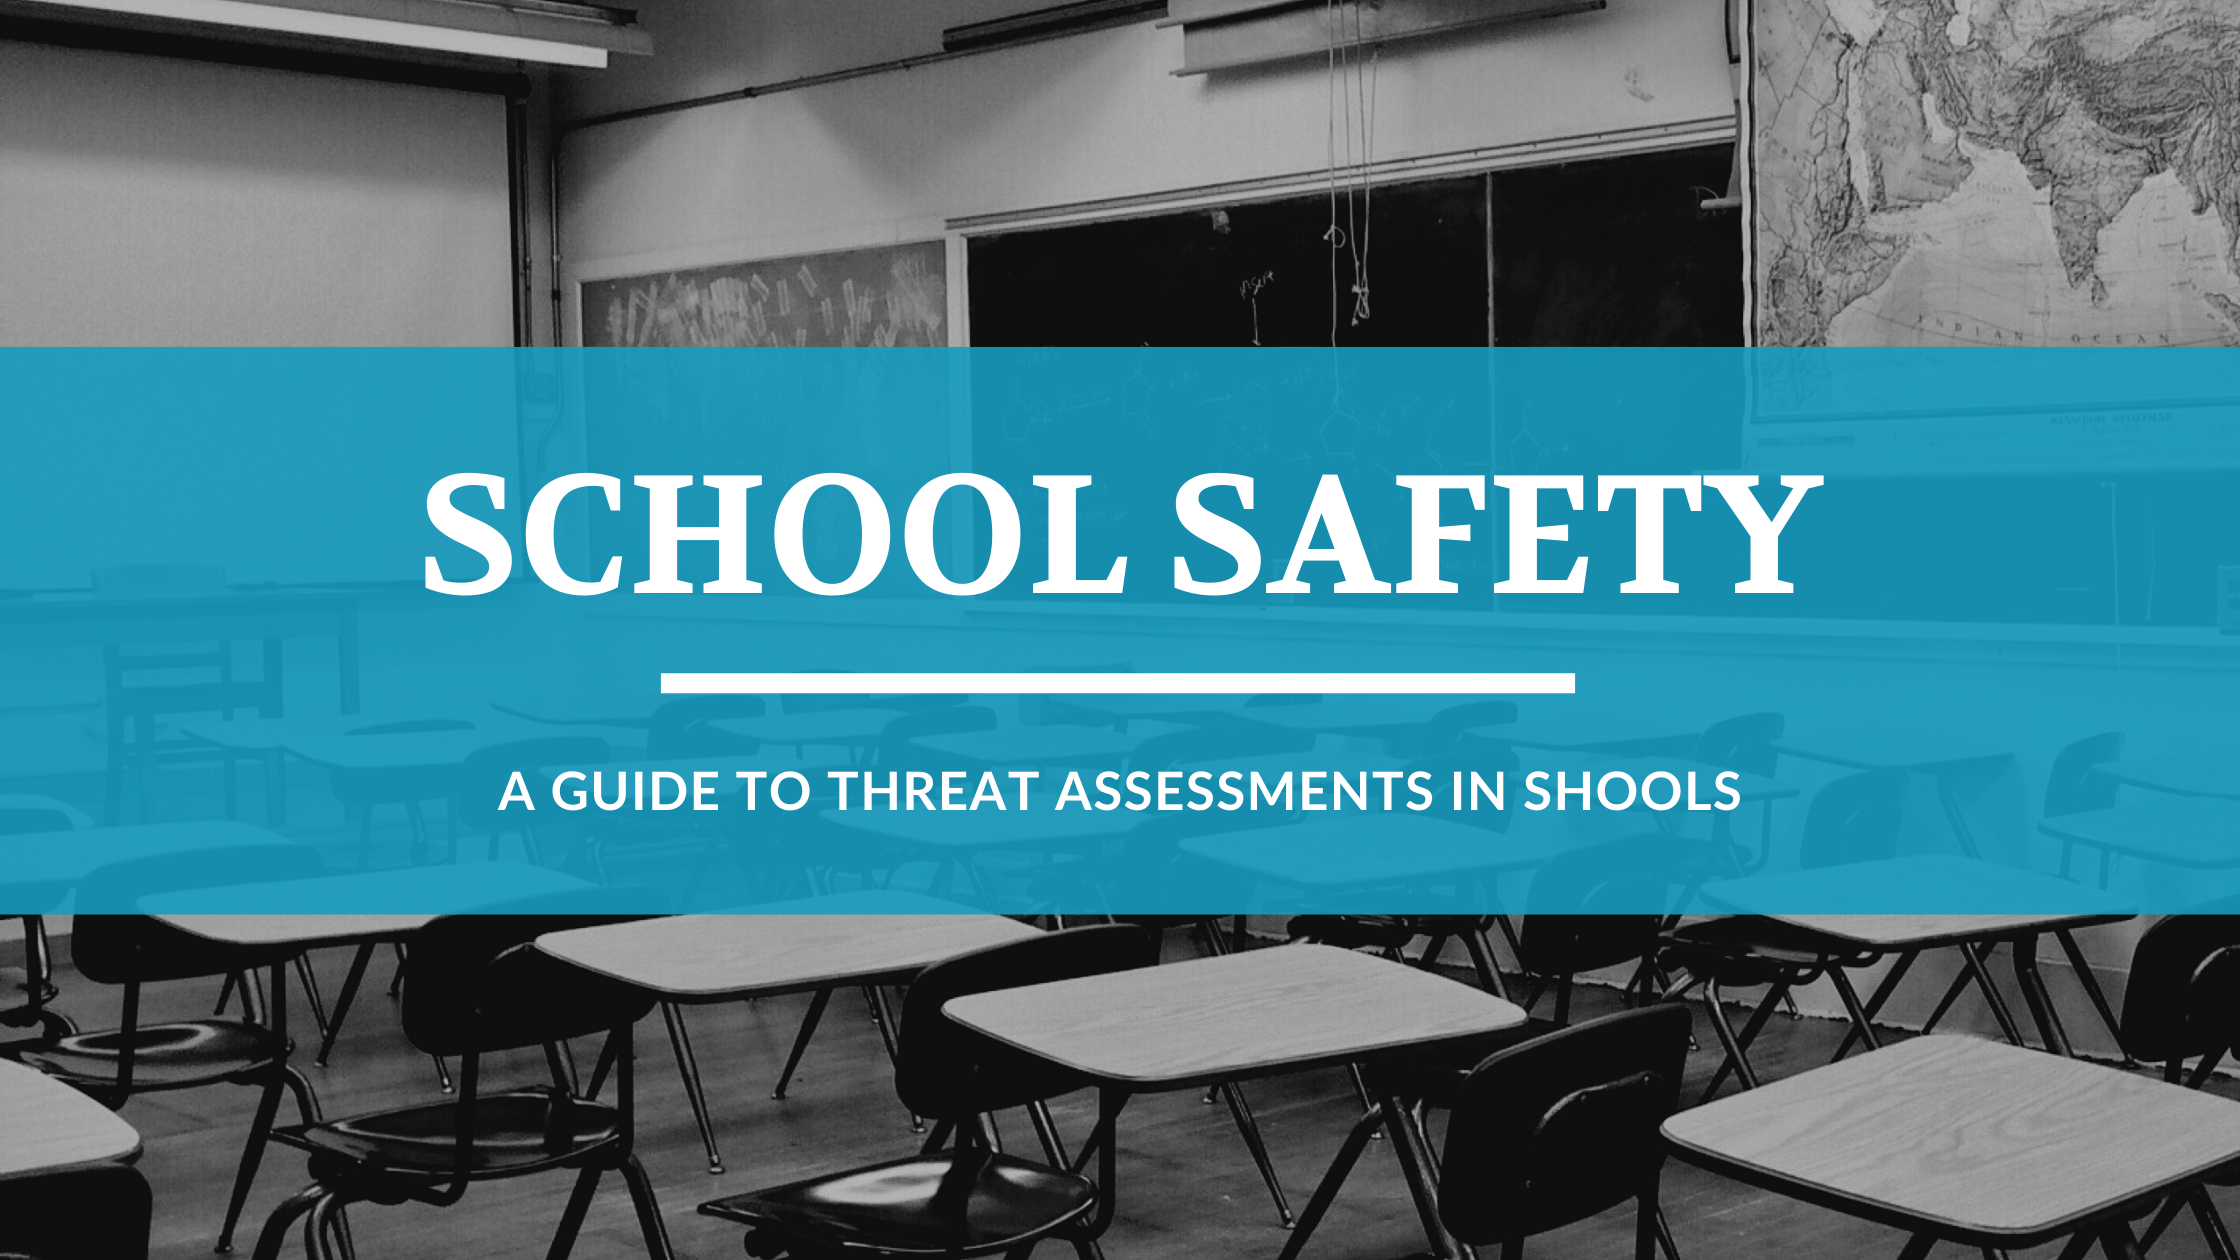 A GUIDE TO MANAGING THREATENING SITUATIONS AND TO CREATING SAFE SCHOOL CLIMATES